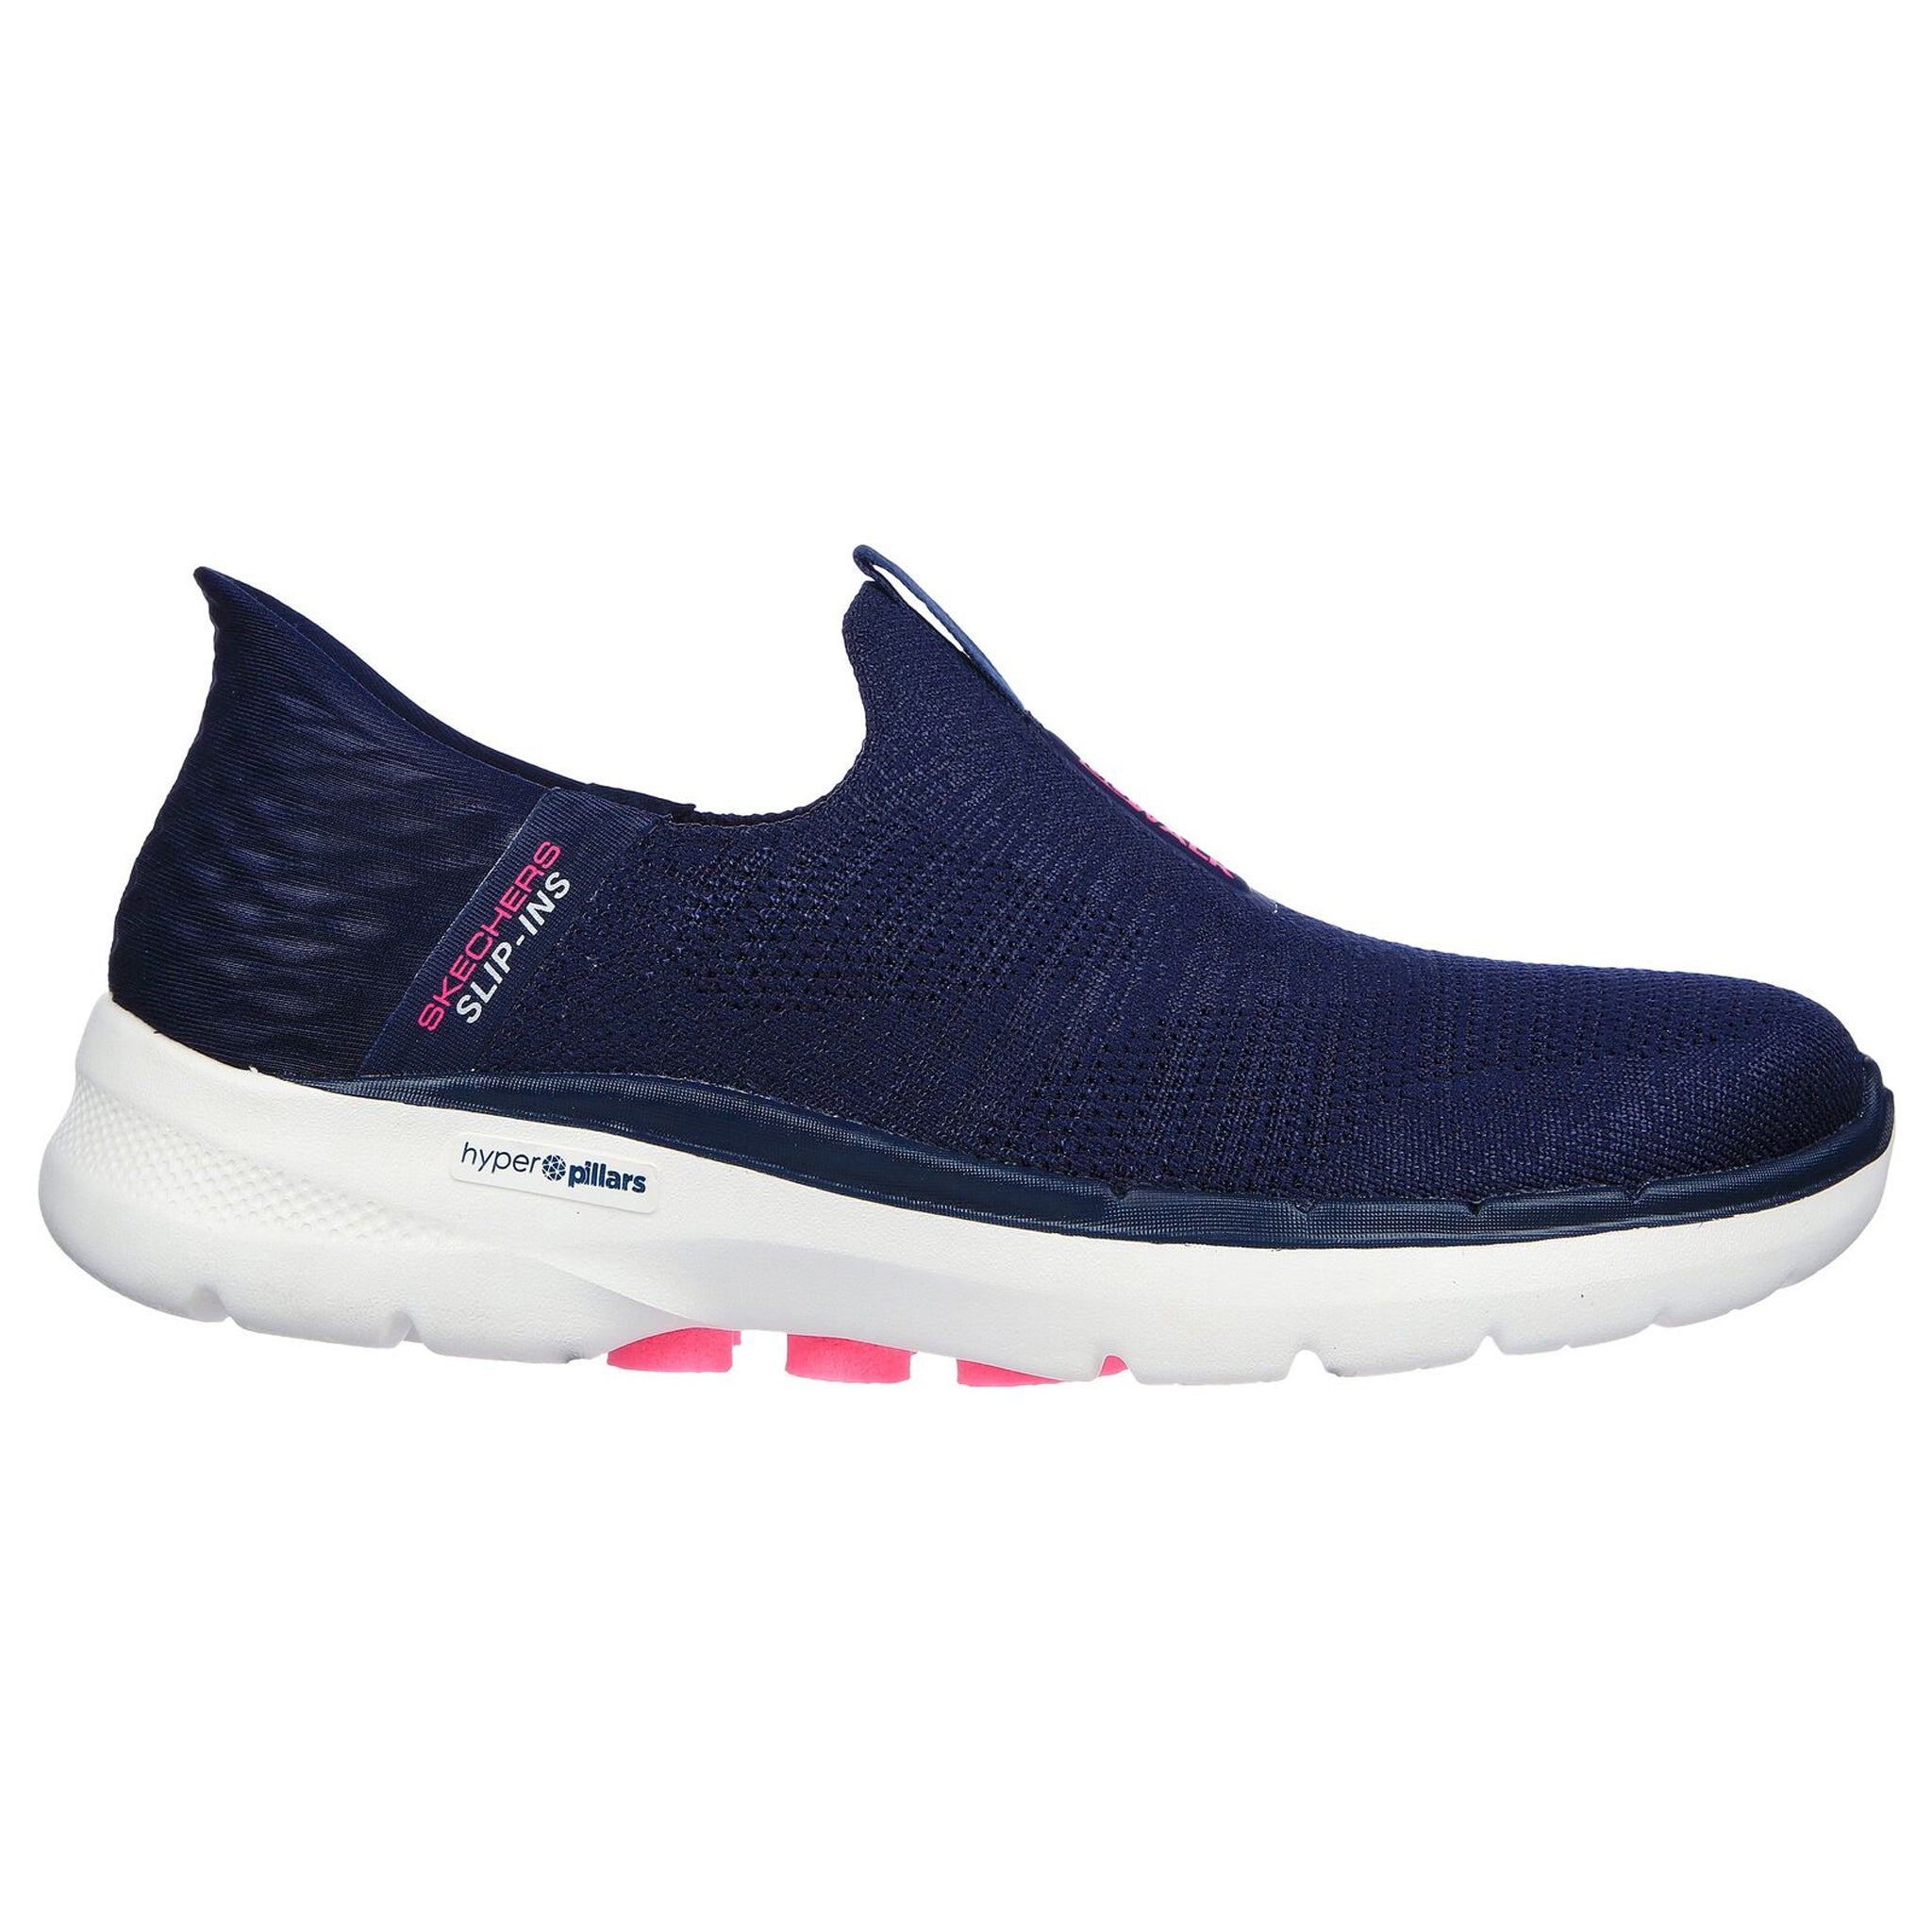 Buy ASIAN Shoes Women Casual Sneaker Lace-up Walking Shoes with Lightweight  Extra Cushion Canvas Shoes for Girl's (Navy Blue, Numeric_7) at Amazon.in